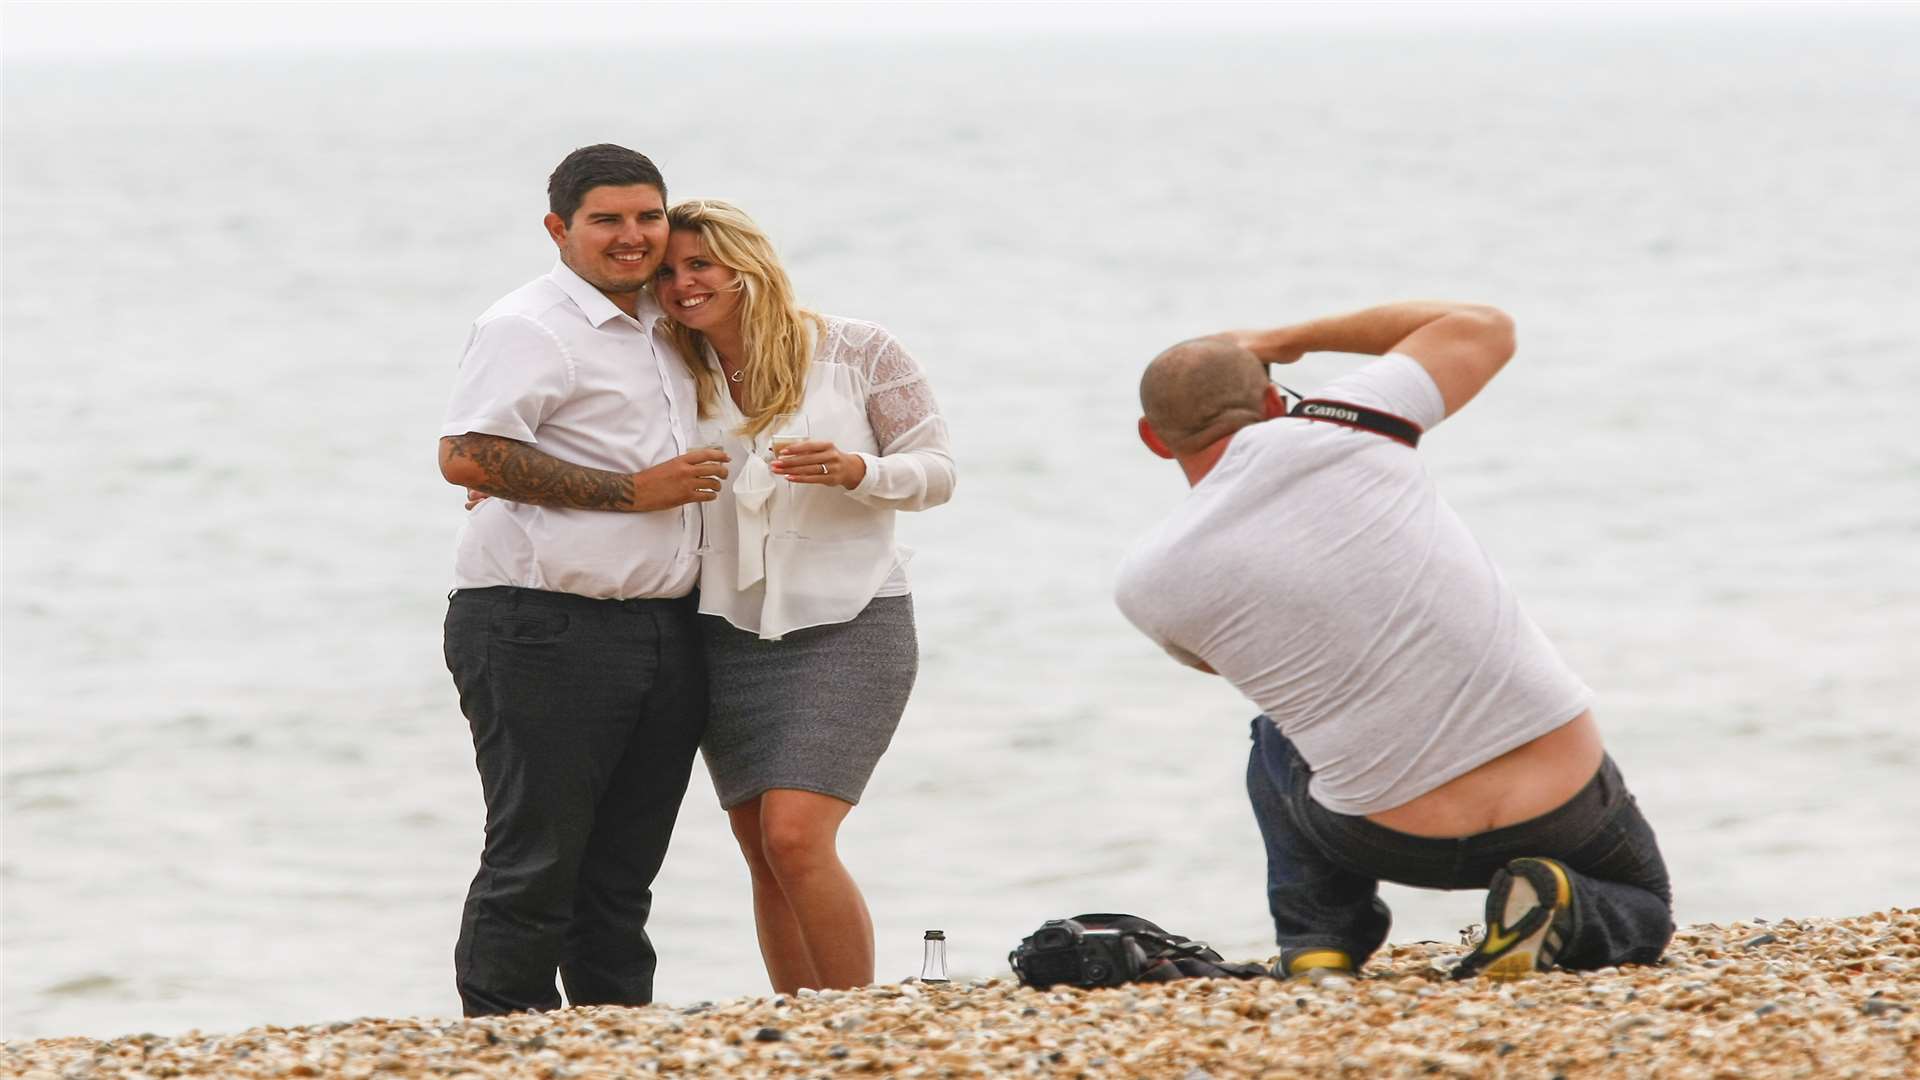 The Mercury caught the moment Kerry Stamp said yes to Dan Reid's proposal, thanks to Airads UK